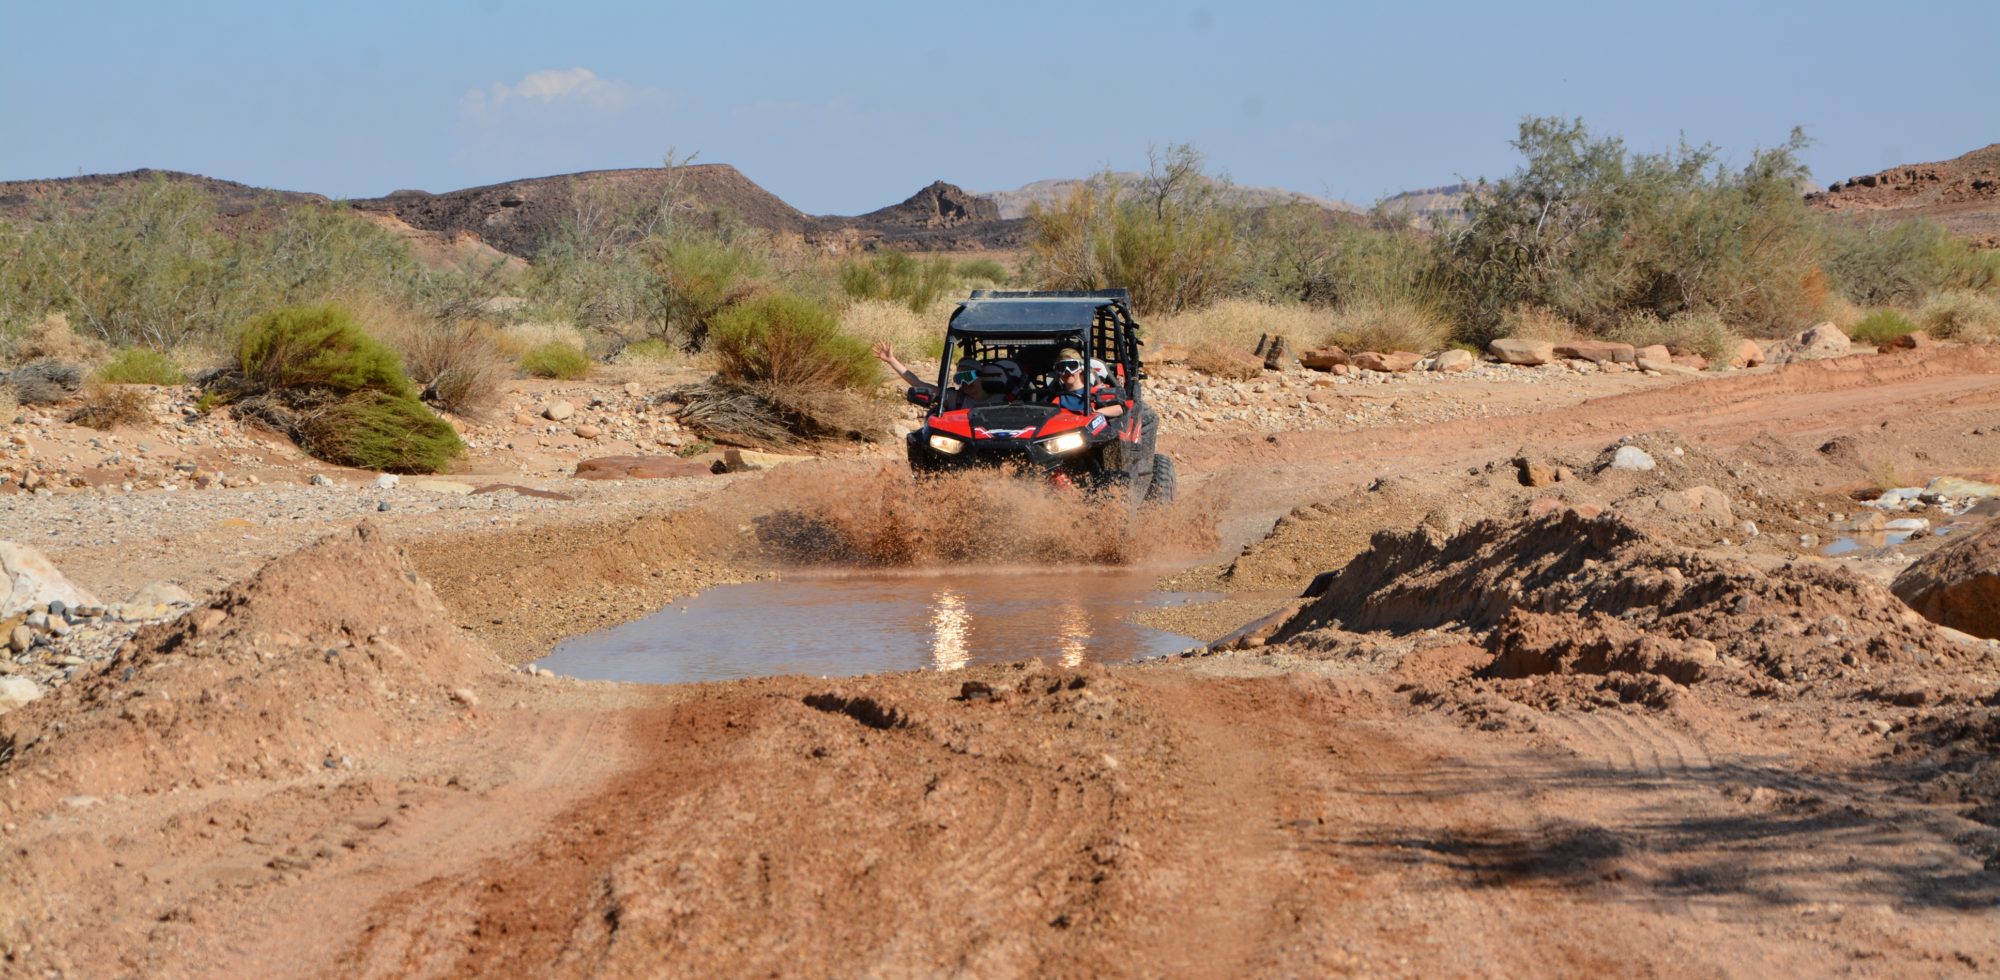 Crossing the desert with jeep